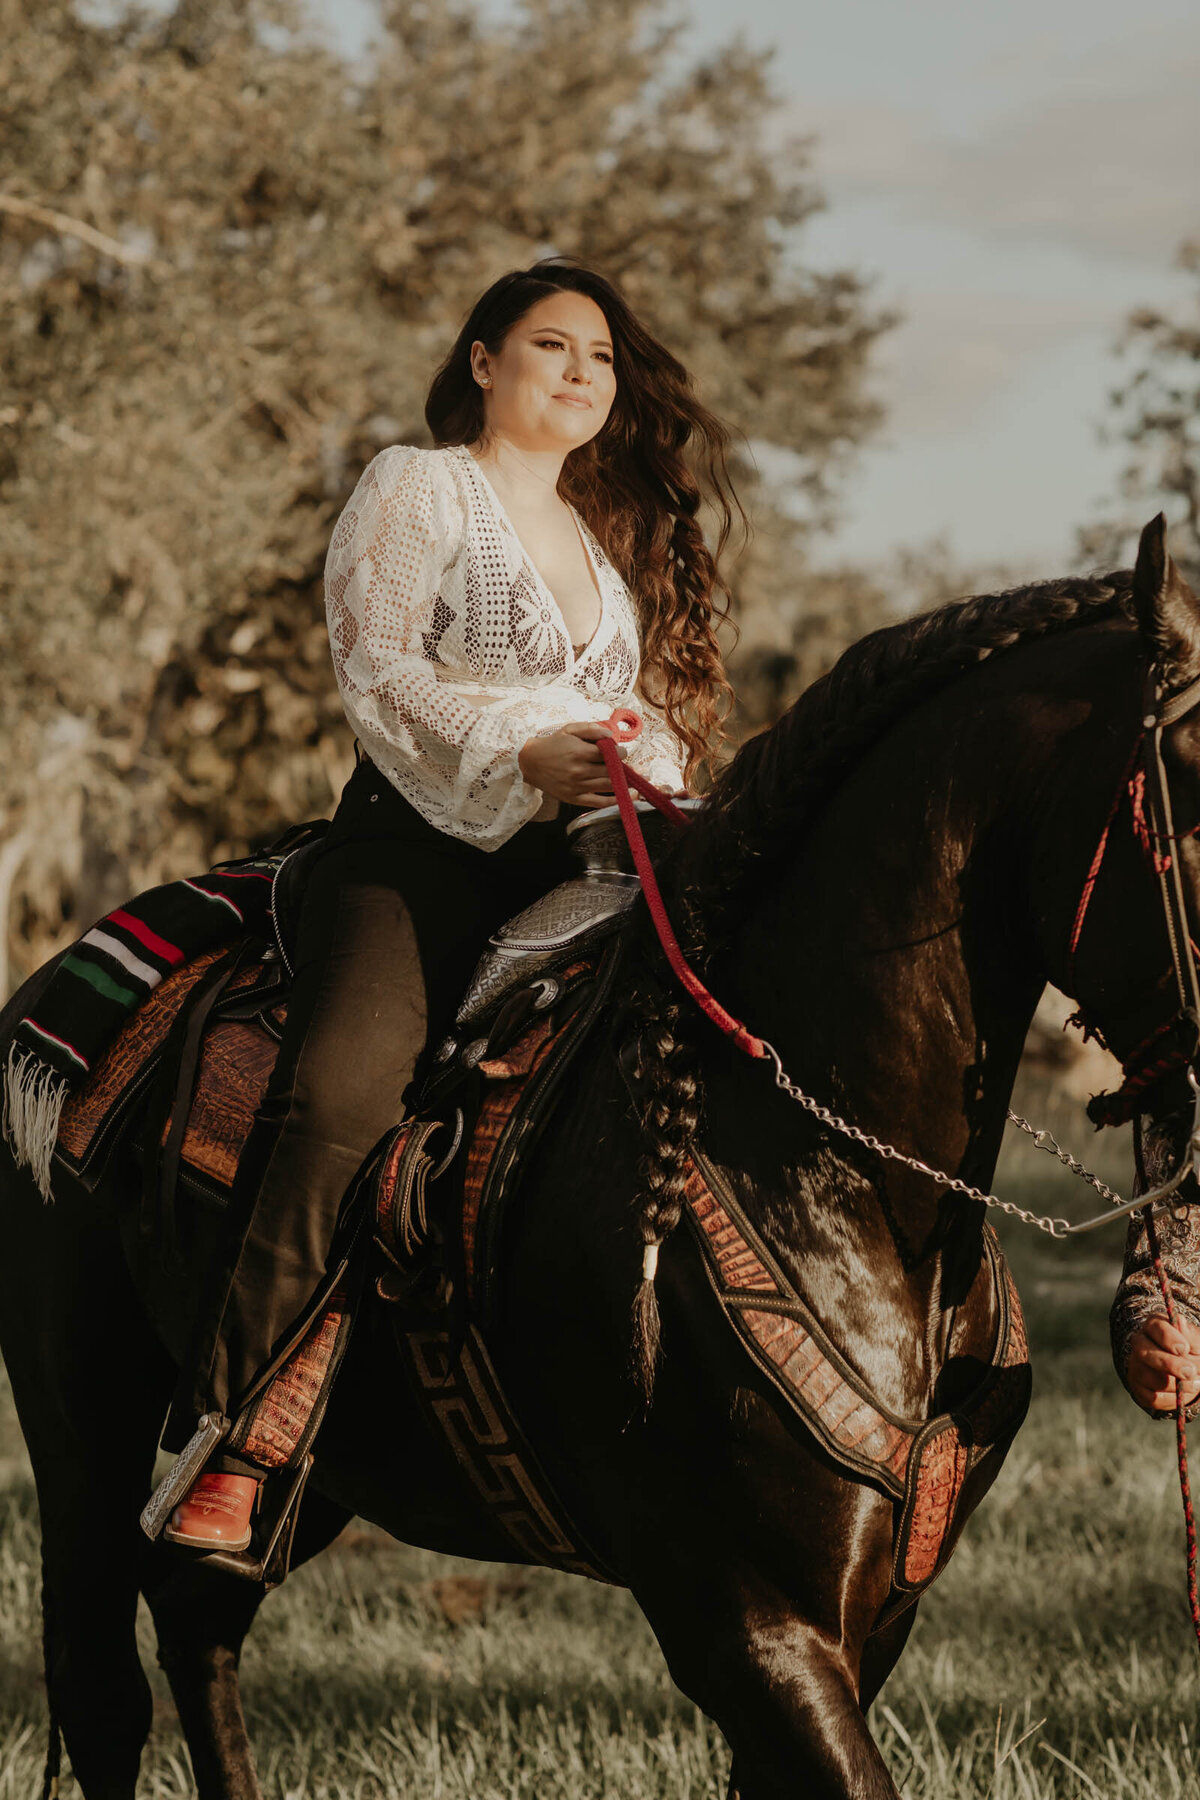 This image is of a bride on horseback.